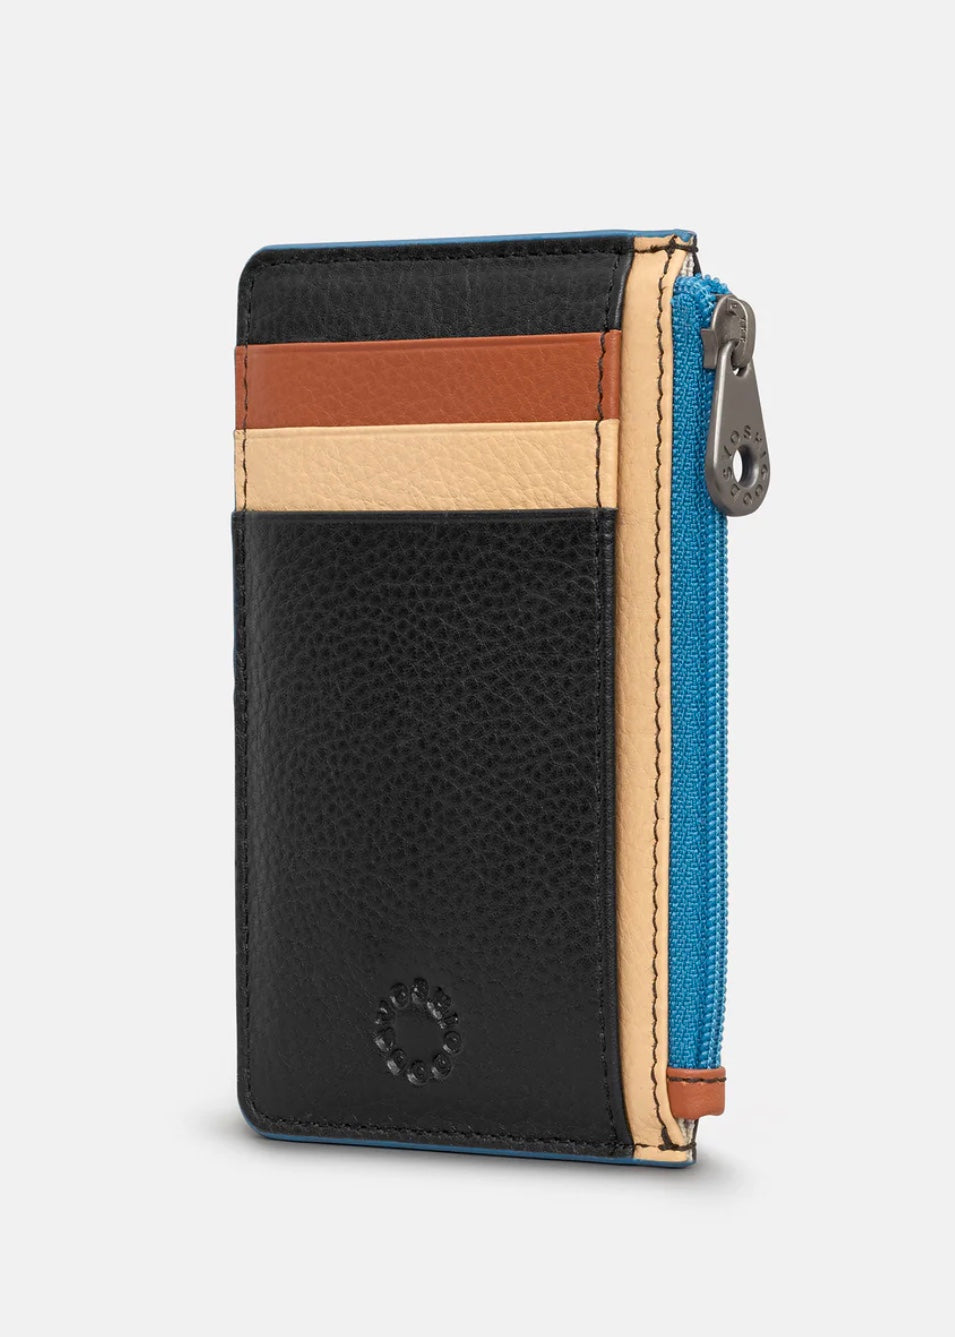 Yoshi Leather - Zip Top Card Holder / Rustic Colour Block